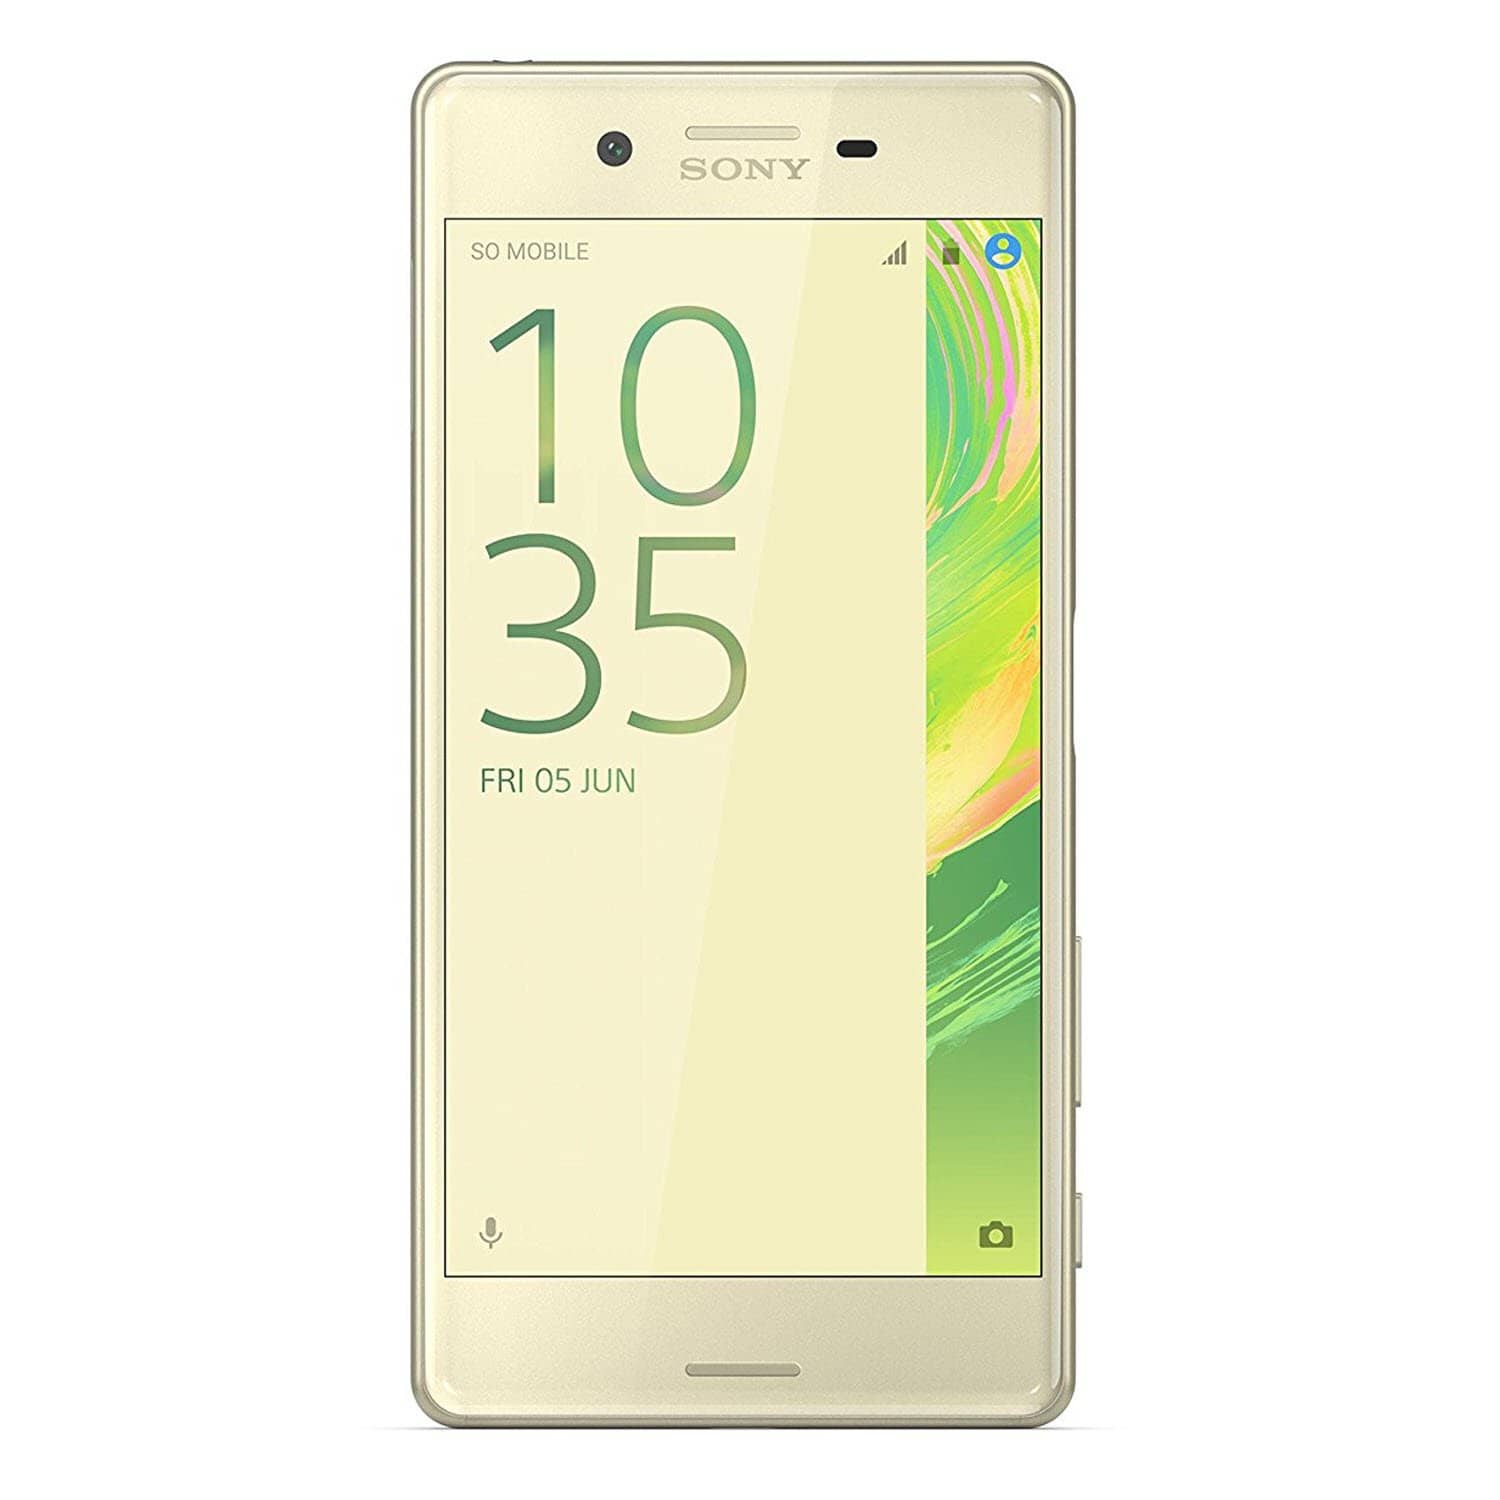 Sony Xperia X unlocked smartphone,32GB Lime Gold